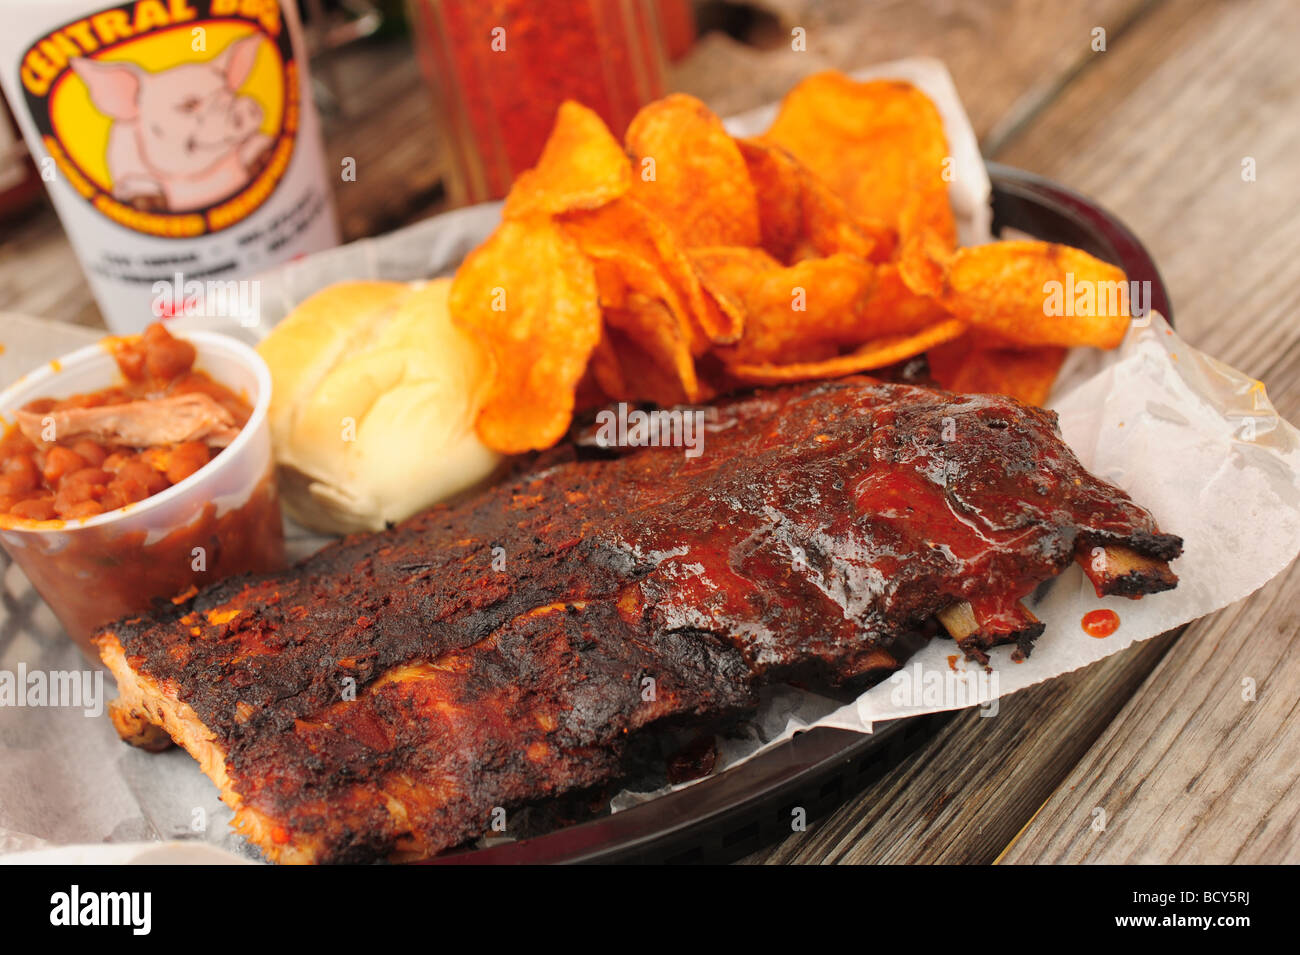 USA Tennessee Memphis Central BBQ restaurant southern style ribs Stock Photo